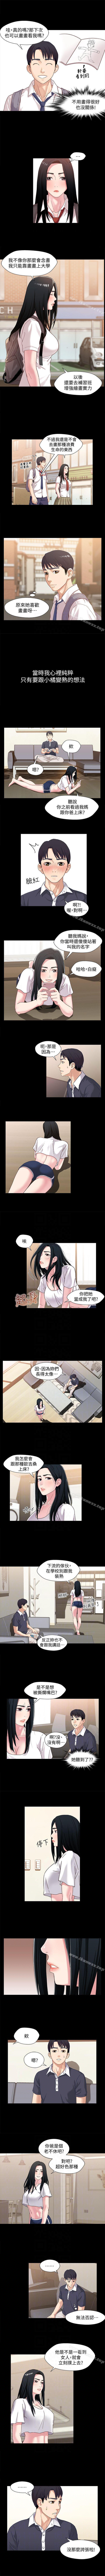 Students 兄妹關係 1-40 Cunnilingus - Page 9